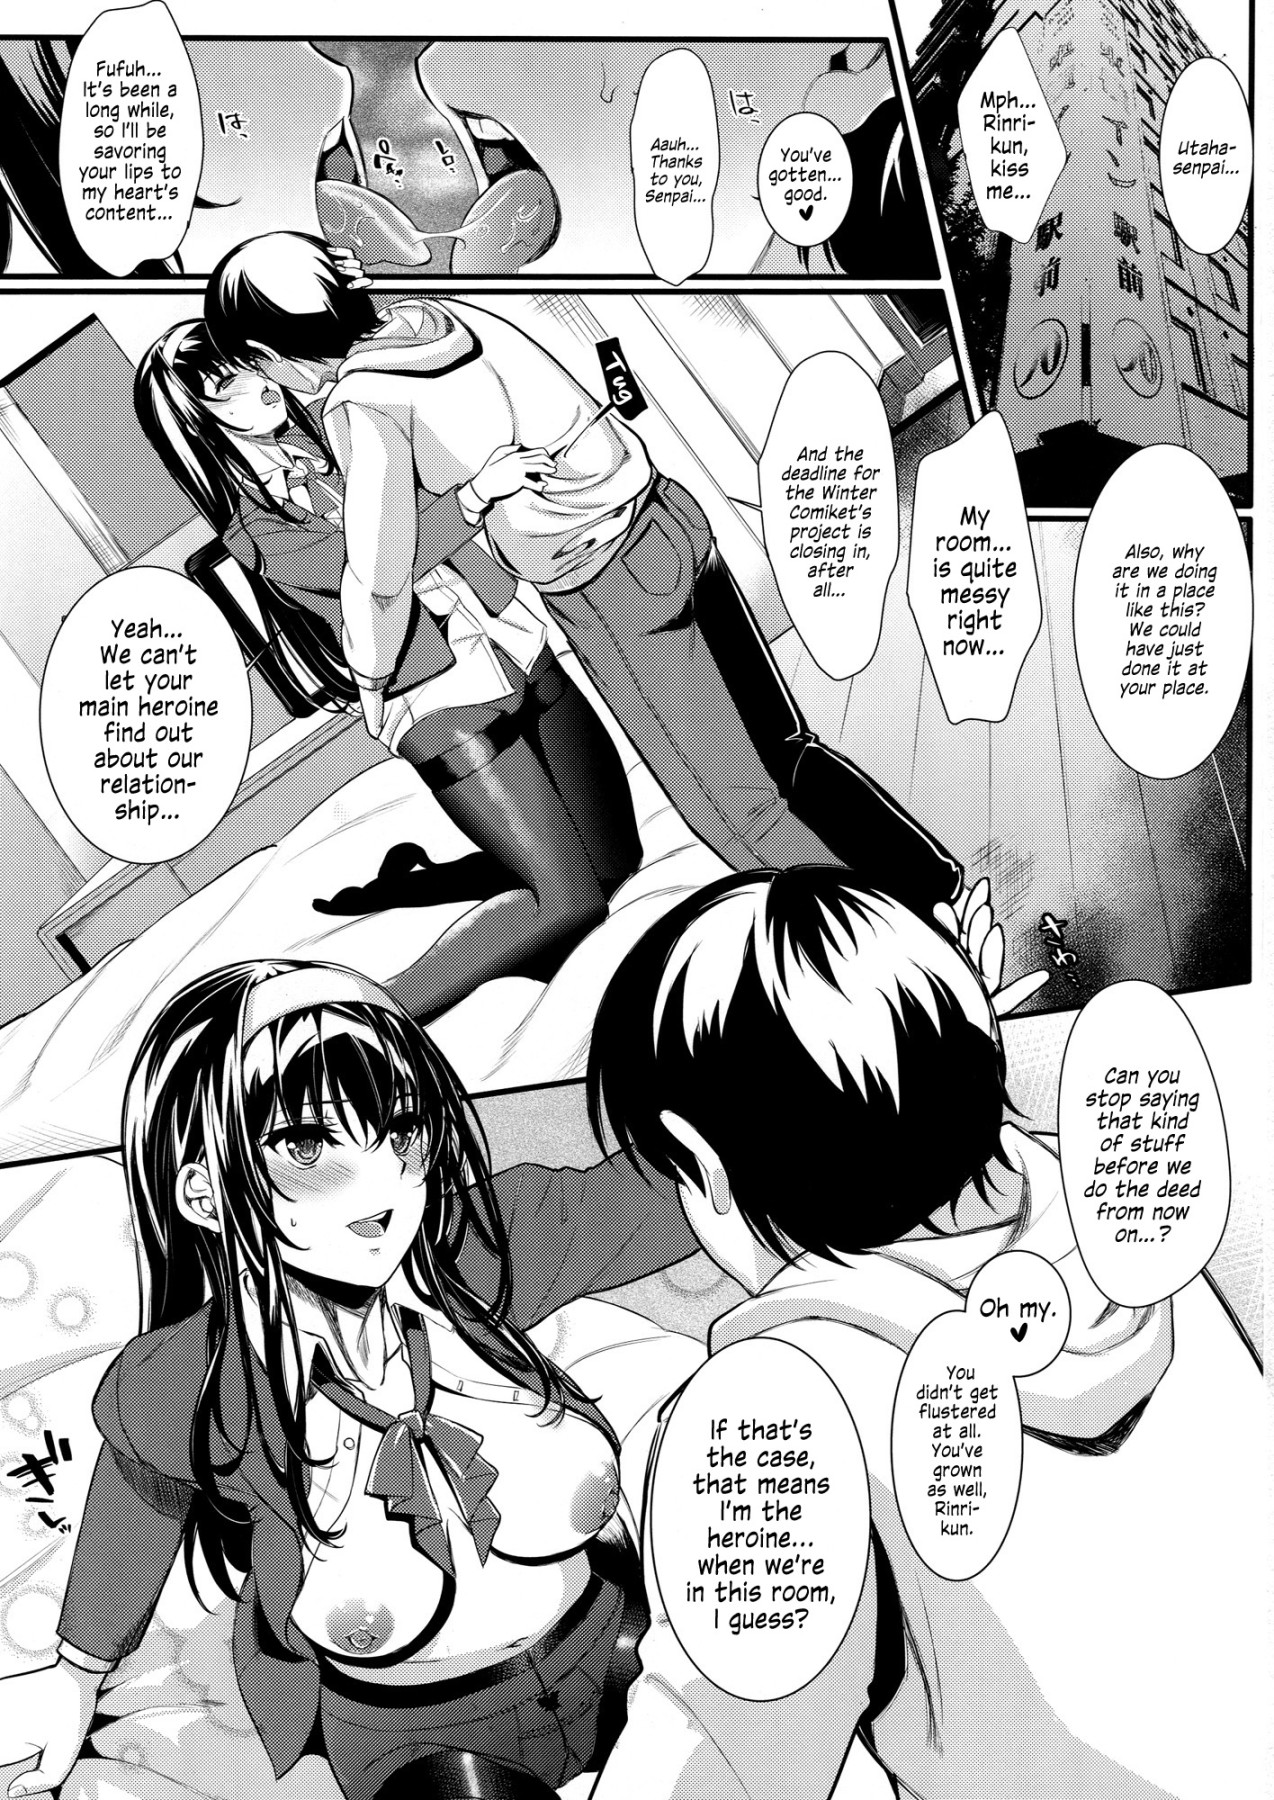 Hentai Manga Comic-How the Boring Couples Does It 5-Read-2